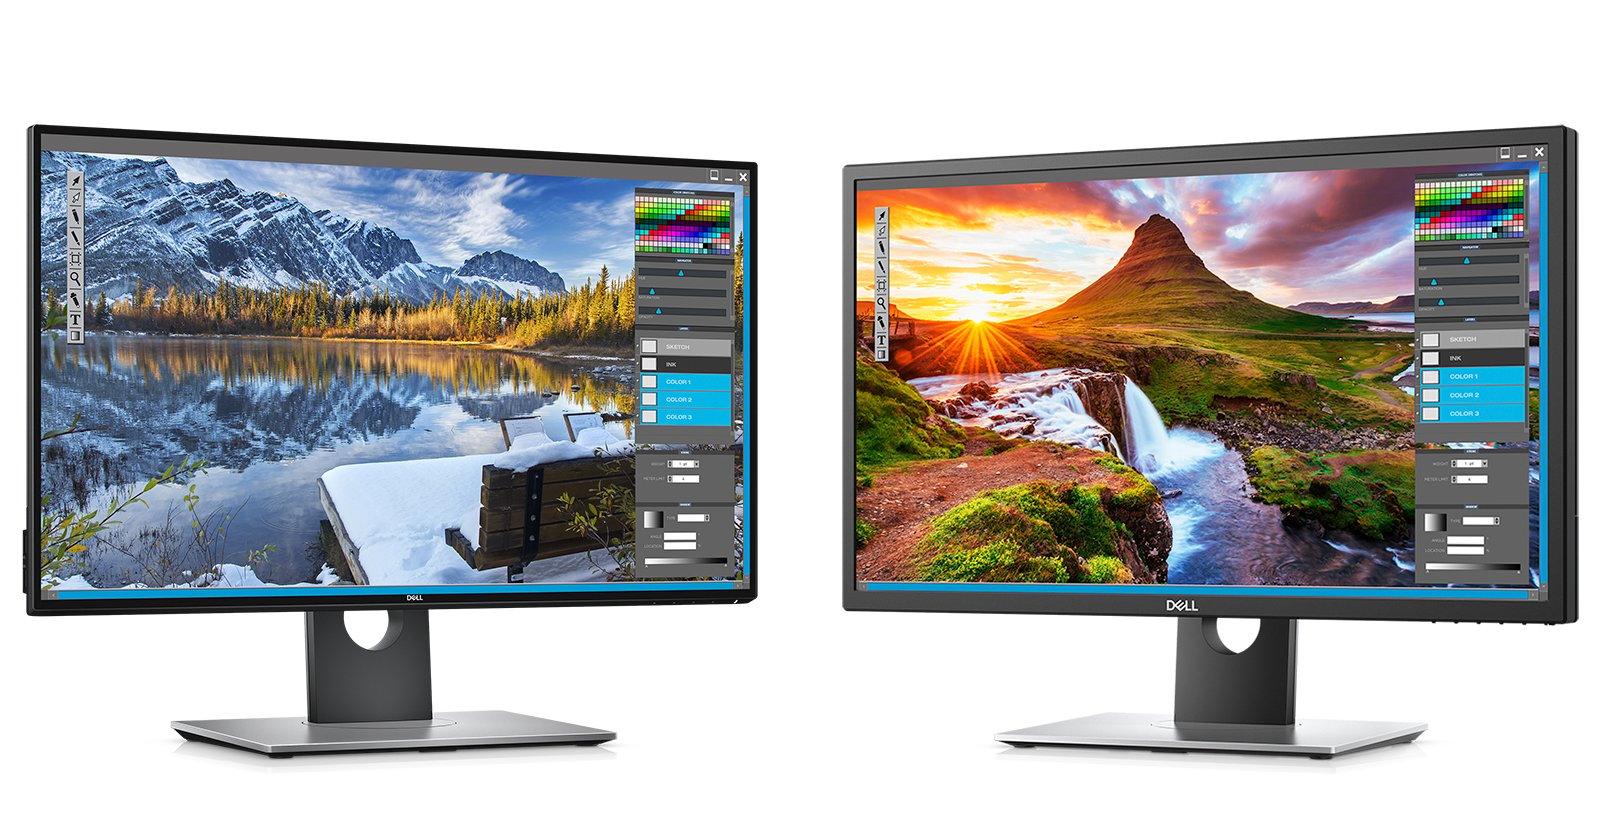 Dell Drops Its First HDR Monitor: A 27-inch 4K Display with 100% Adobe RGB